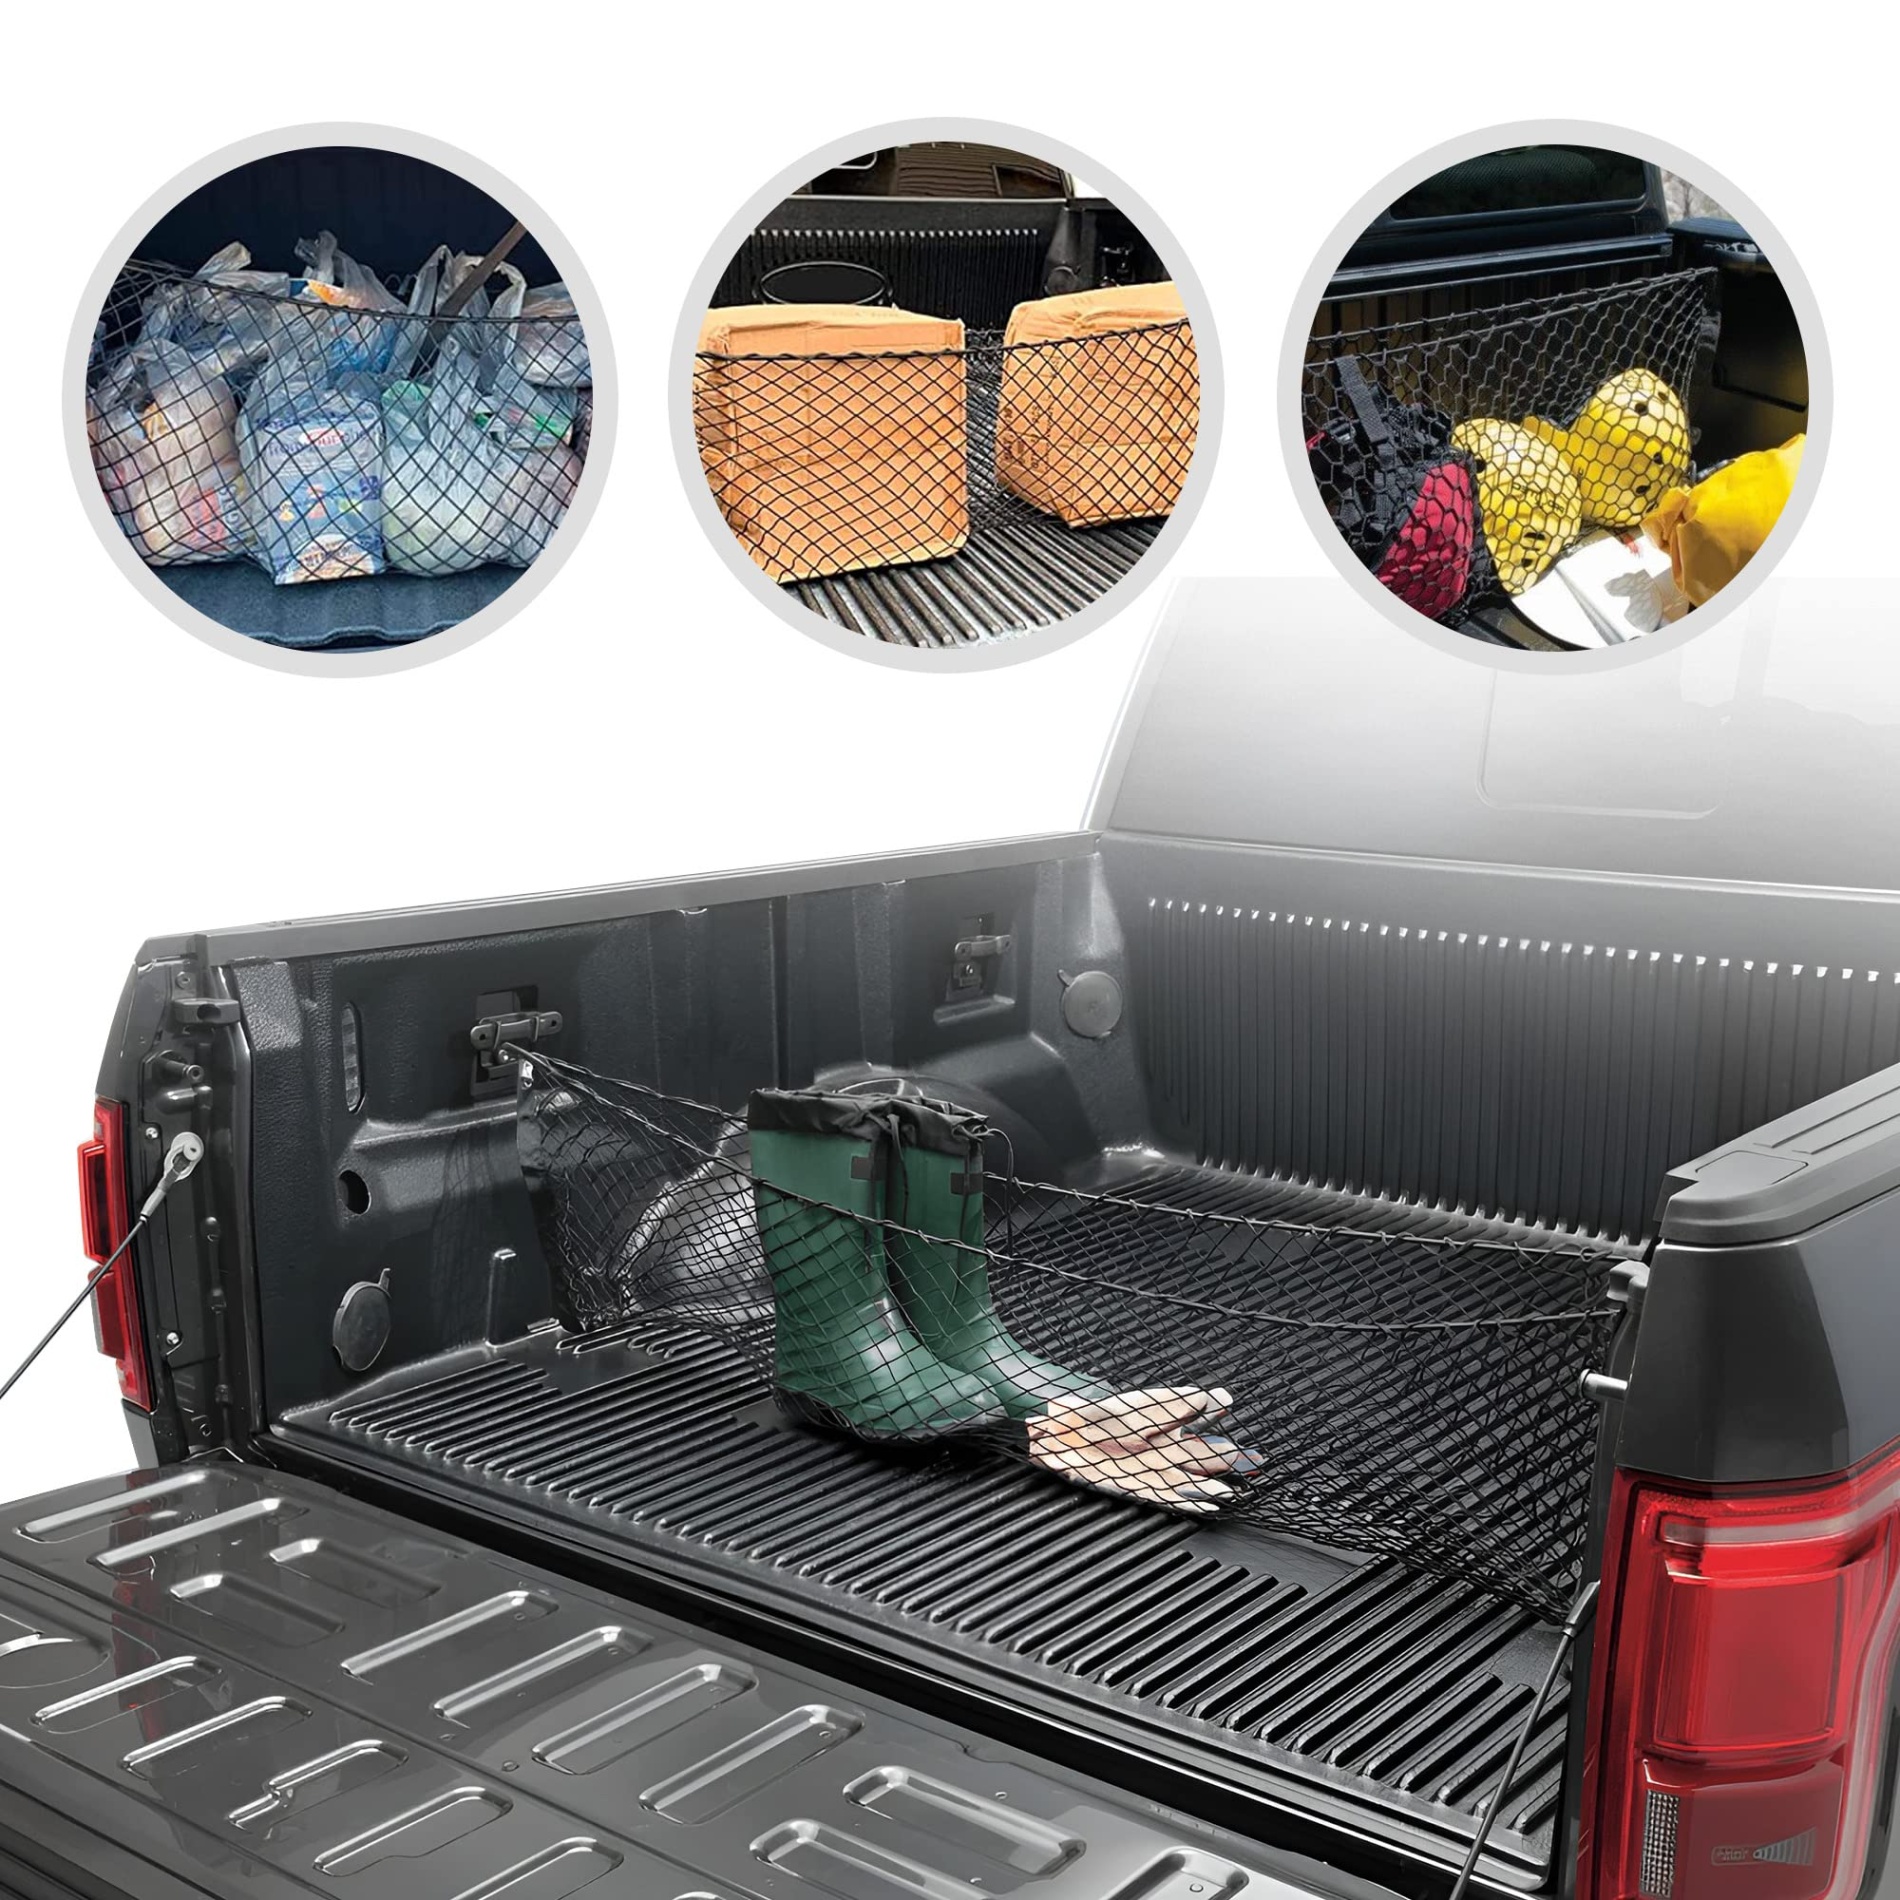 Upgrade Your F150 Ford With Top-notch Accessories For An Epic Ride!